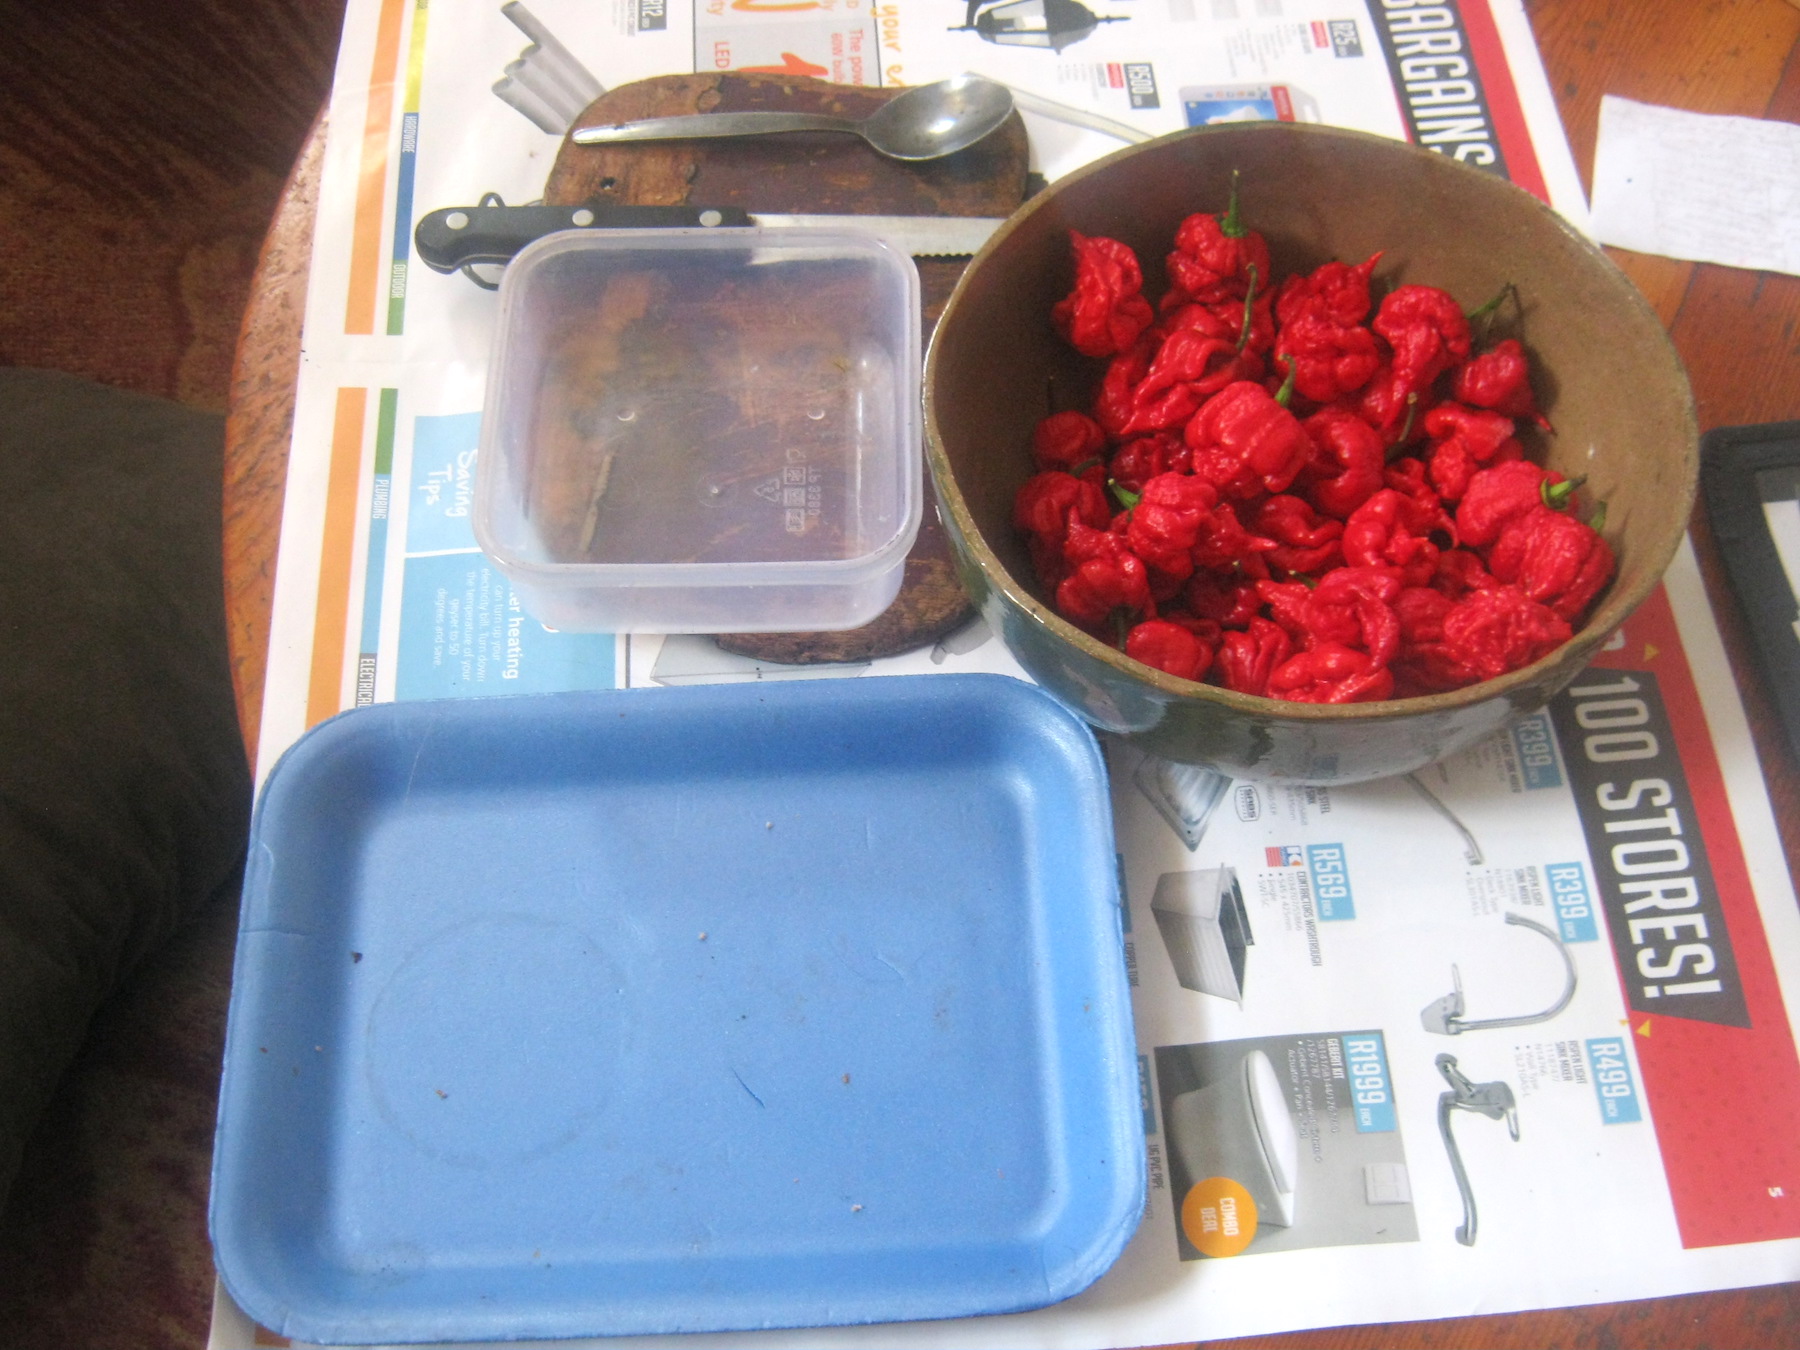 Ripe Carolina Reaper chilis and tools for seed harvesting on a table